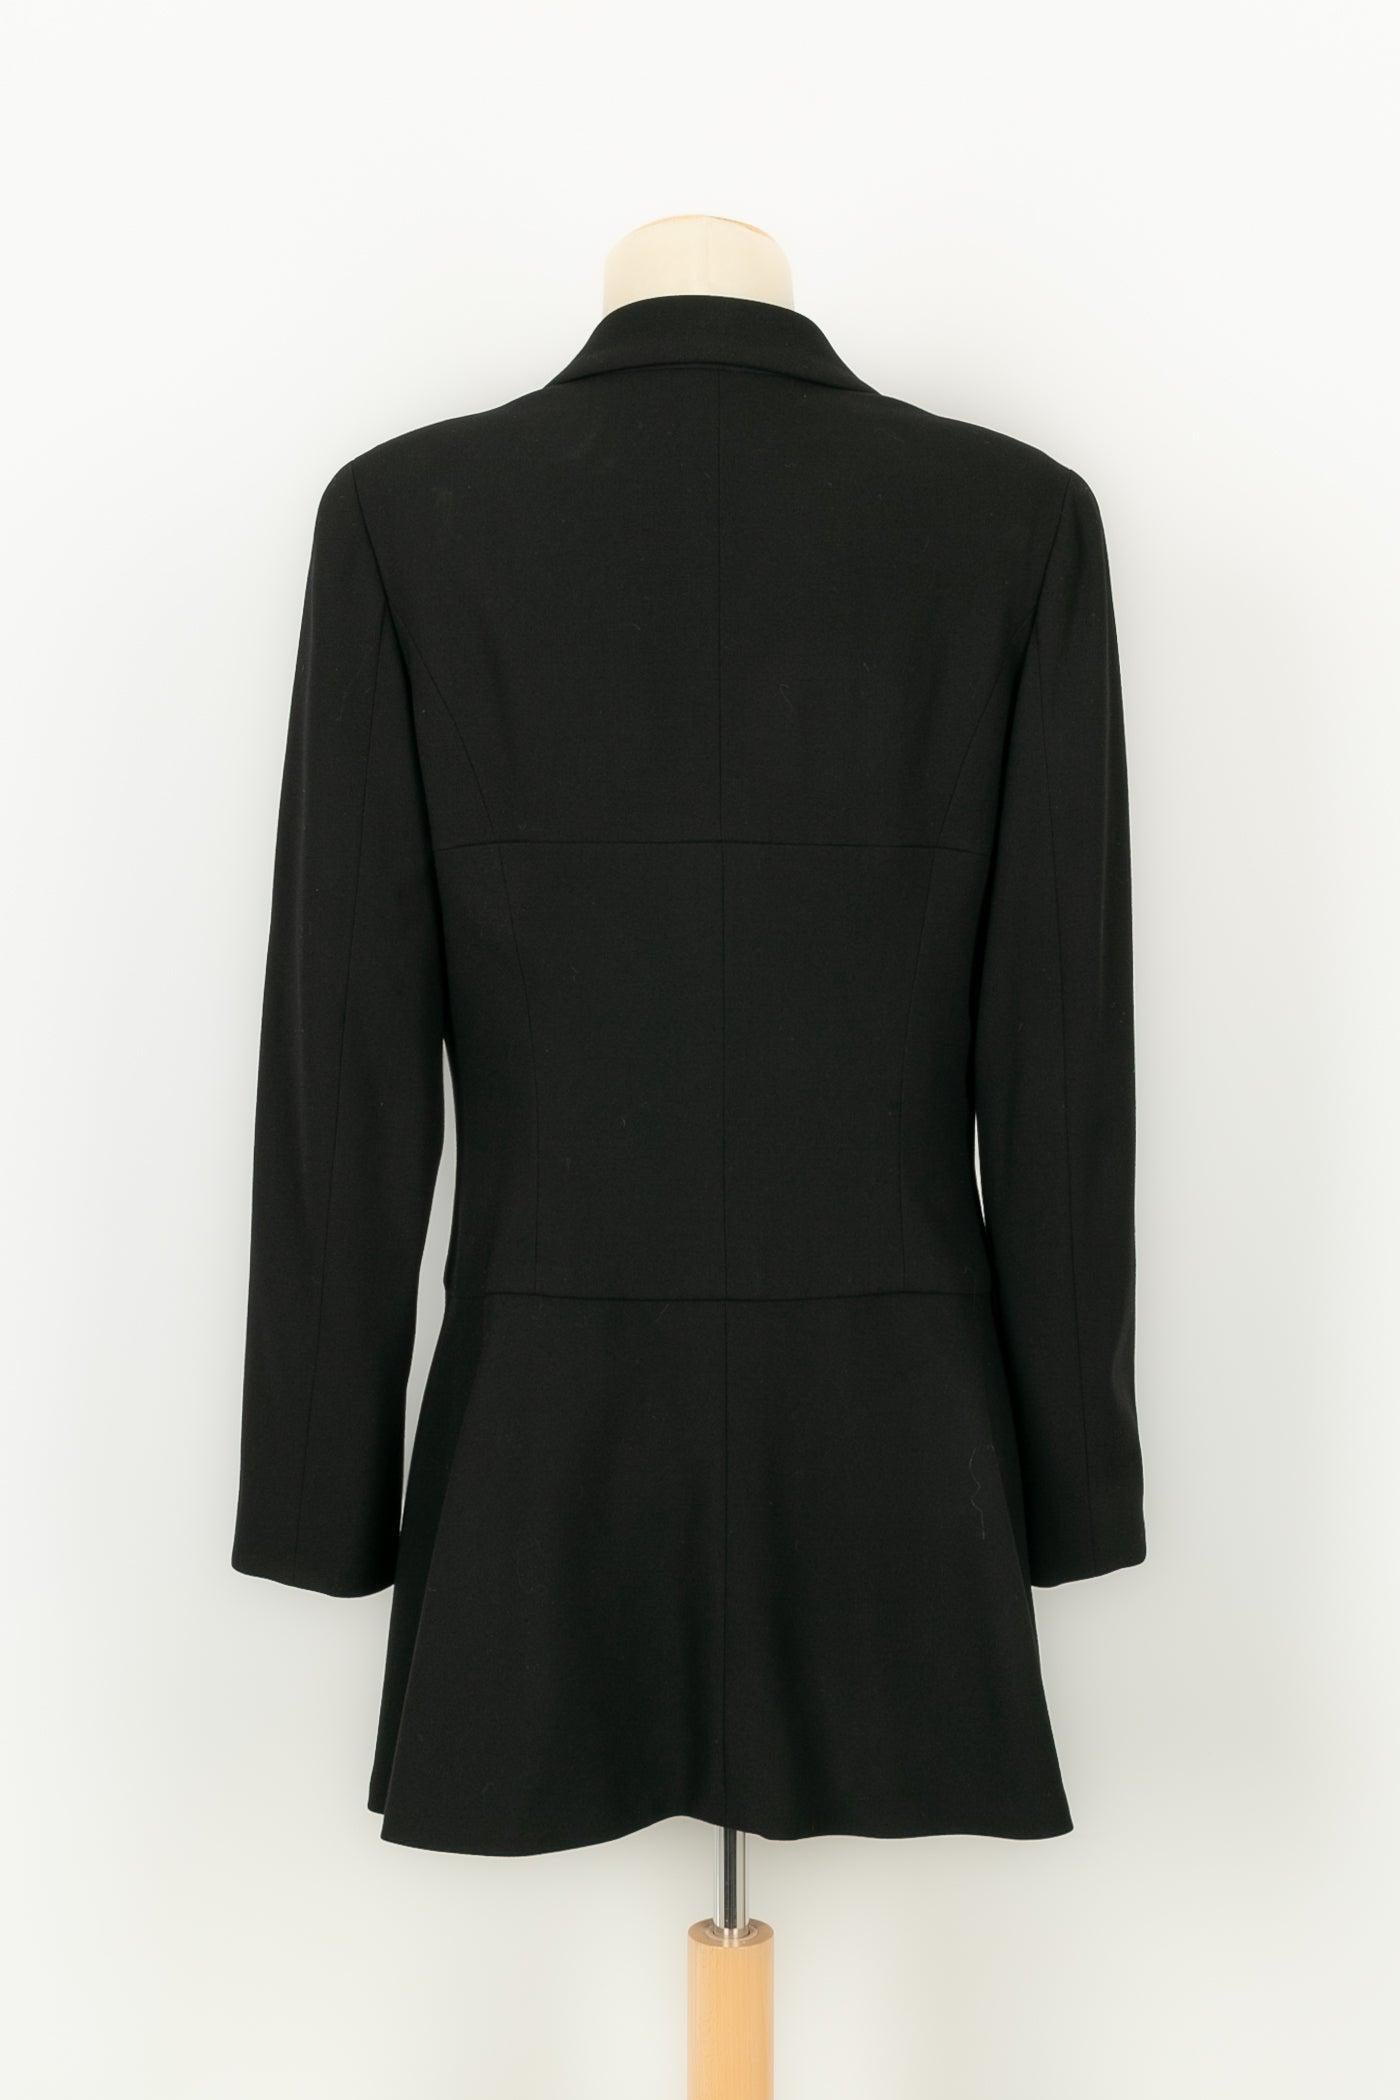 Chanel Suit Set of Jacket and Pants in Black Wool, 1997 For Sale 1